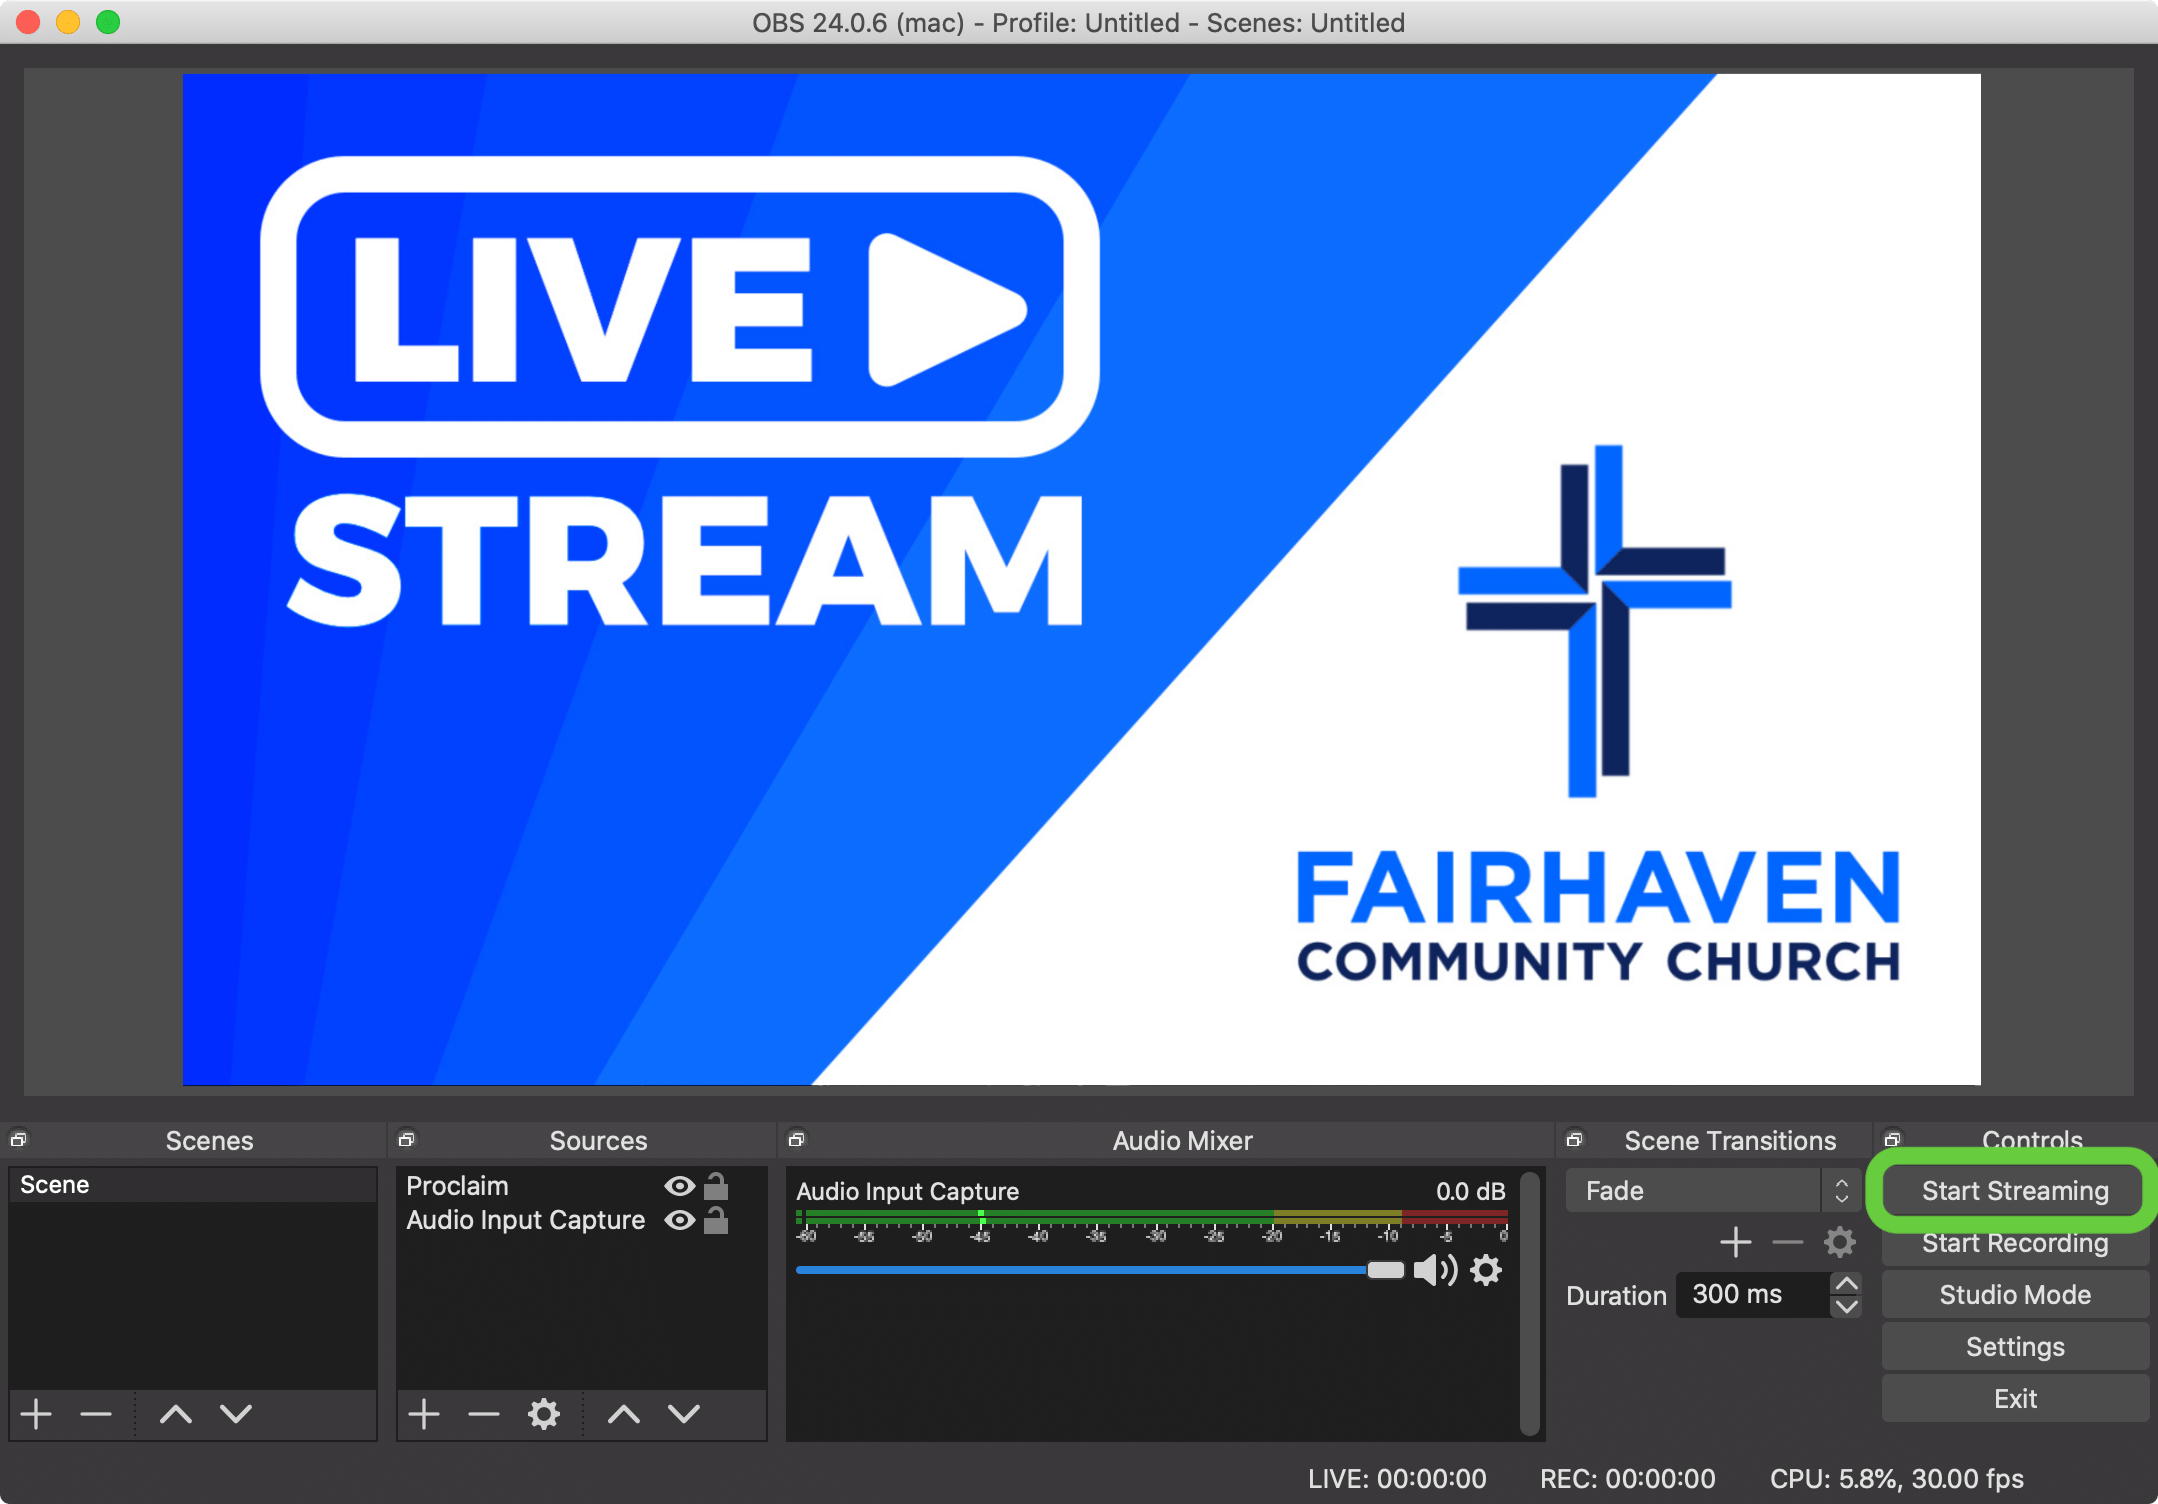 How to Live Stream with Proclaim